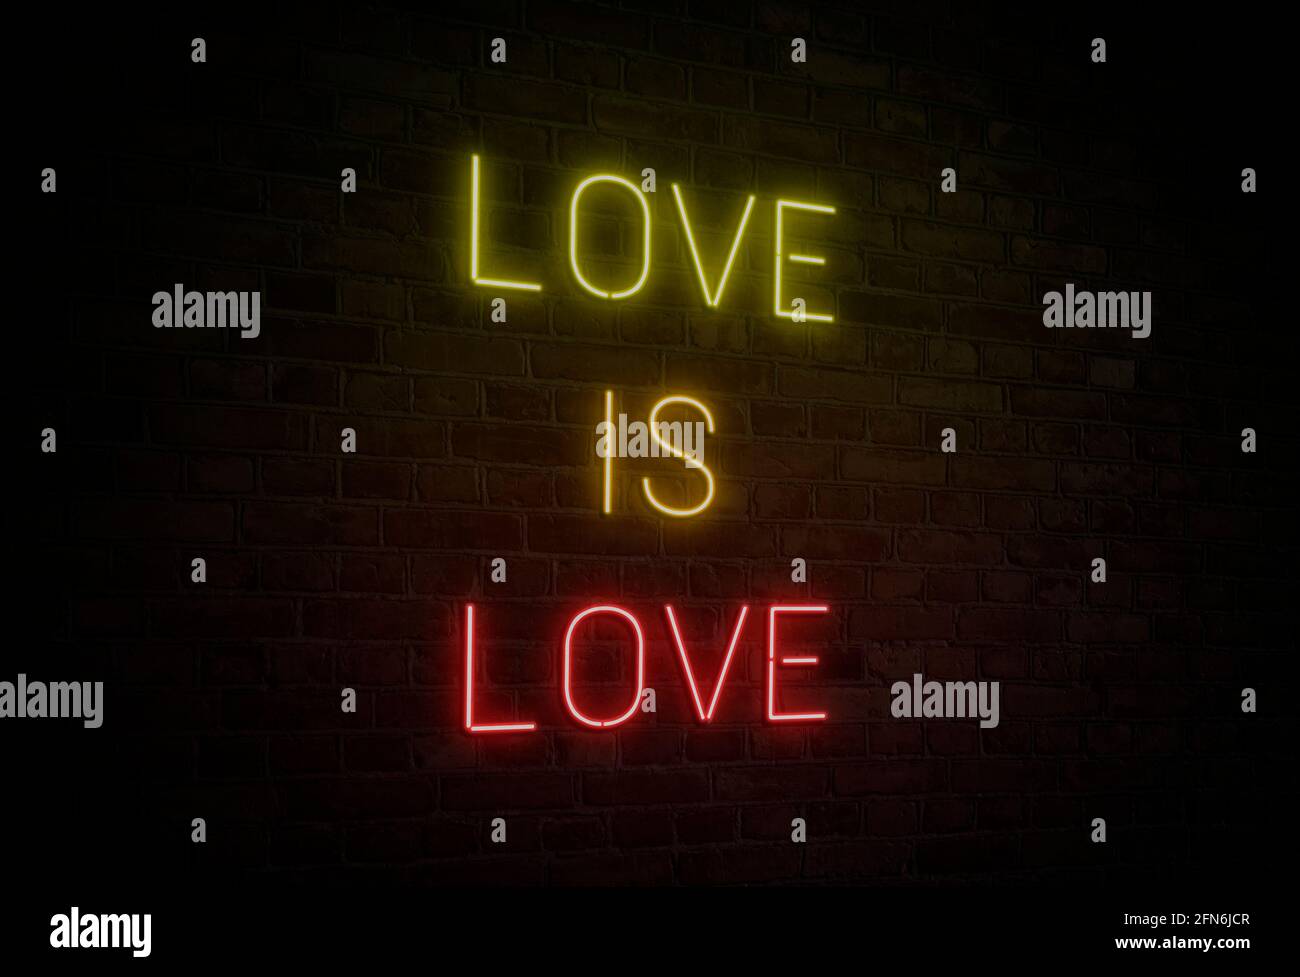 Illuminated and glowing 'LOVE IS LOVE' neon sign in yellow, orange and red colors on dark brick wall. Stock Photo